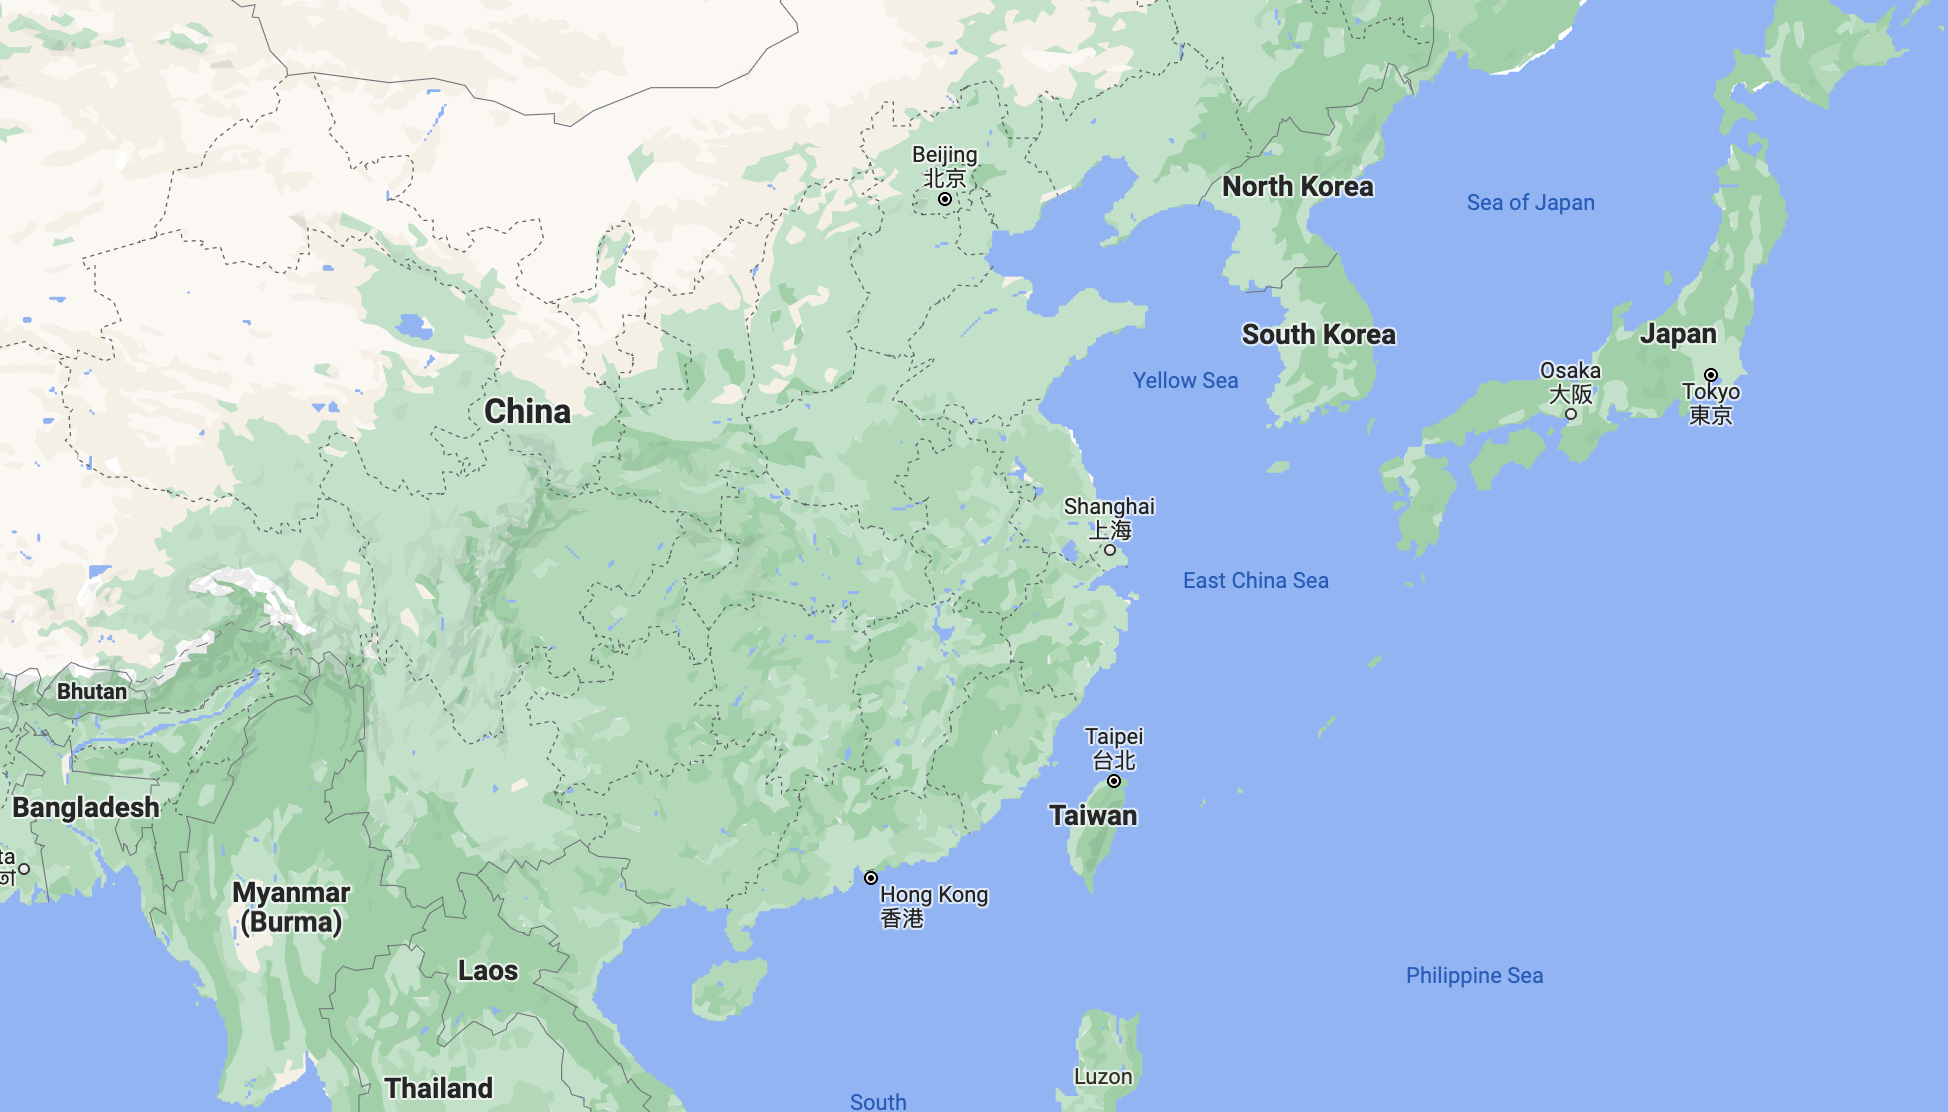 Google maps: A map of the region, featuring Taiwan, China, South Korea, North Korea and Japan.